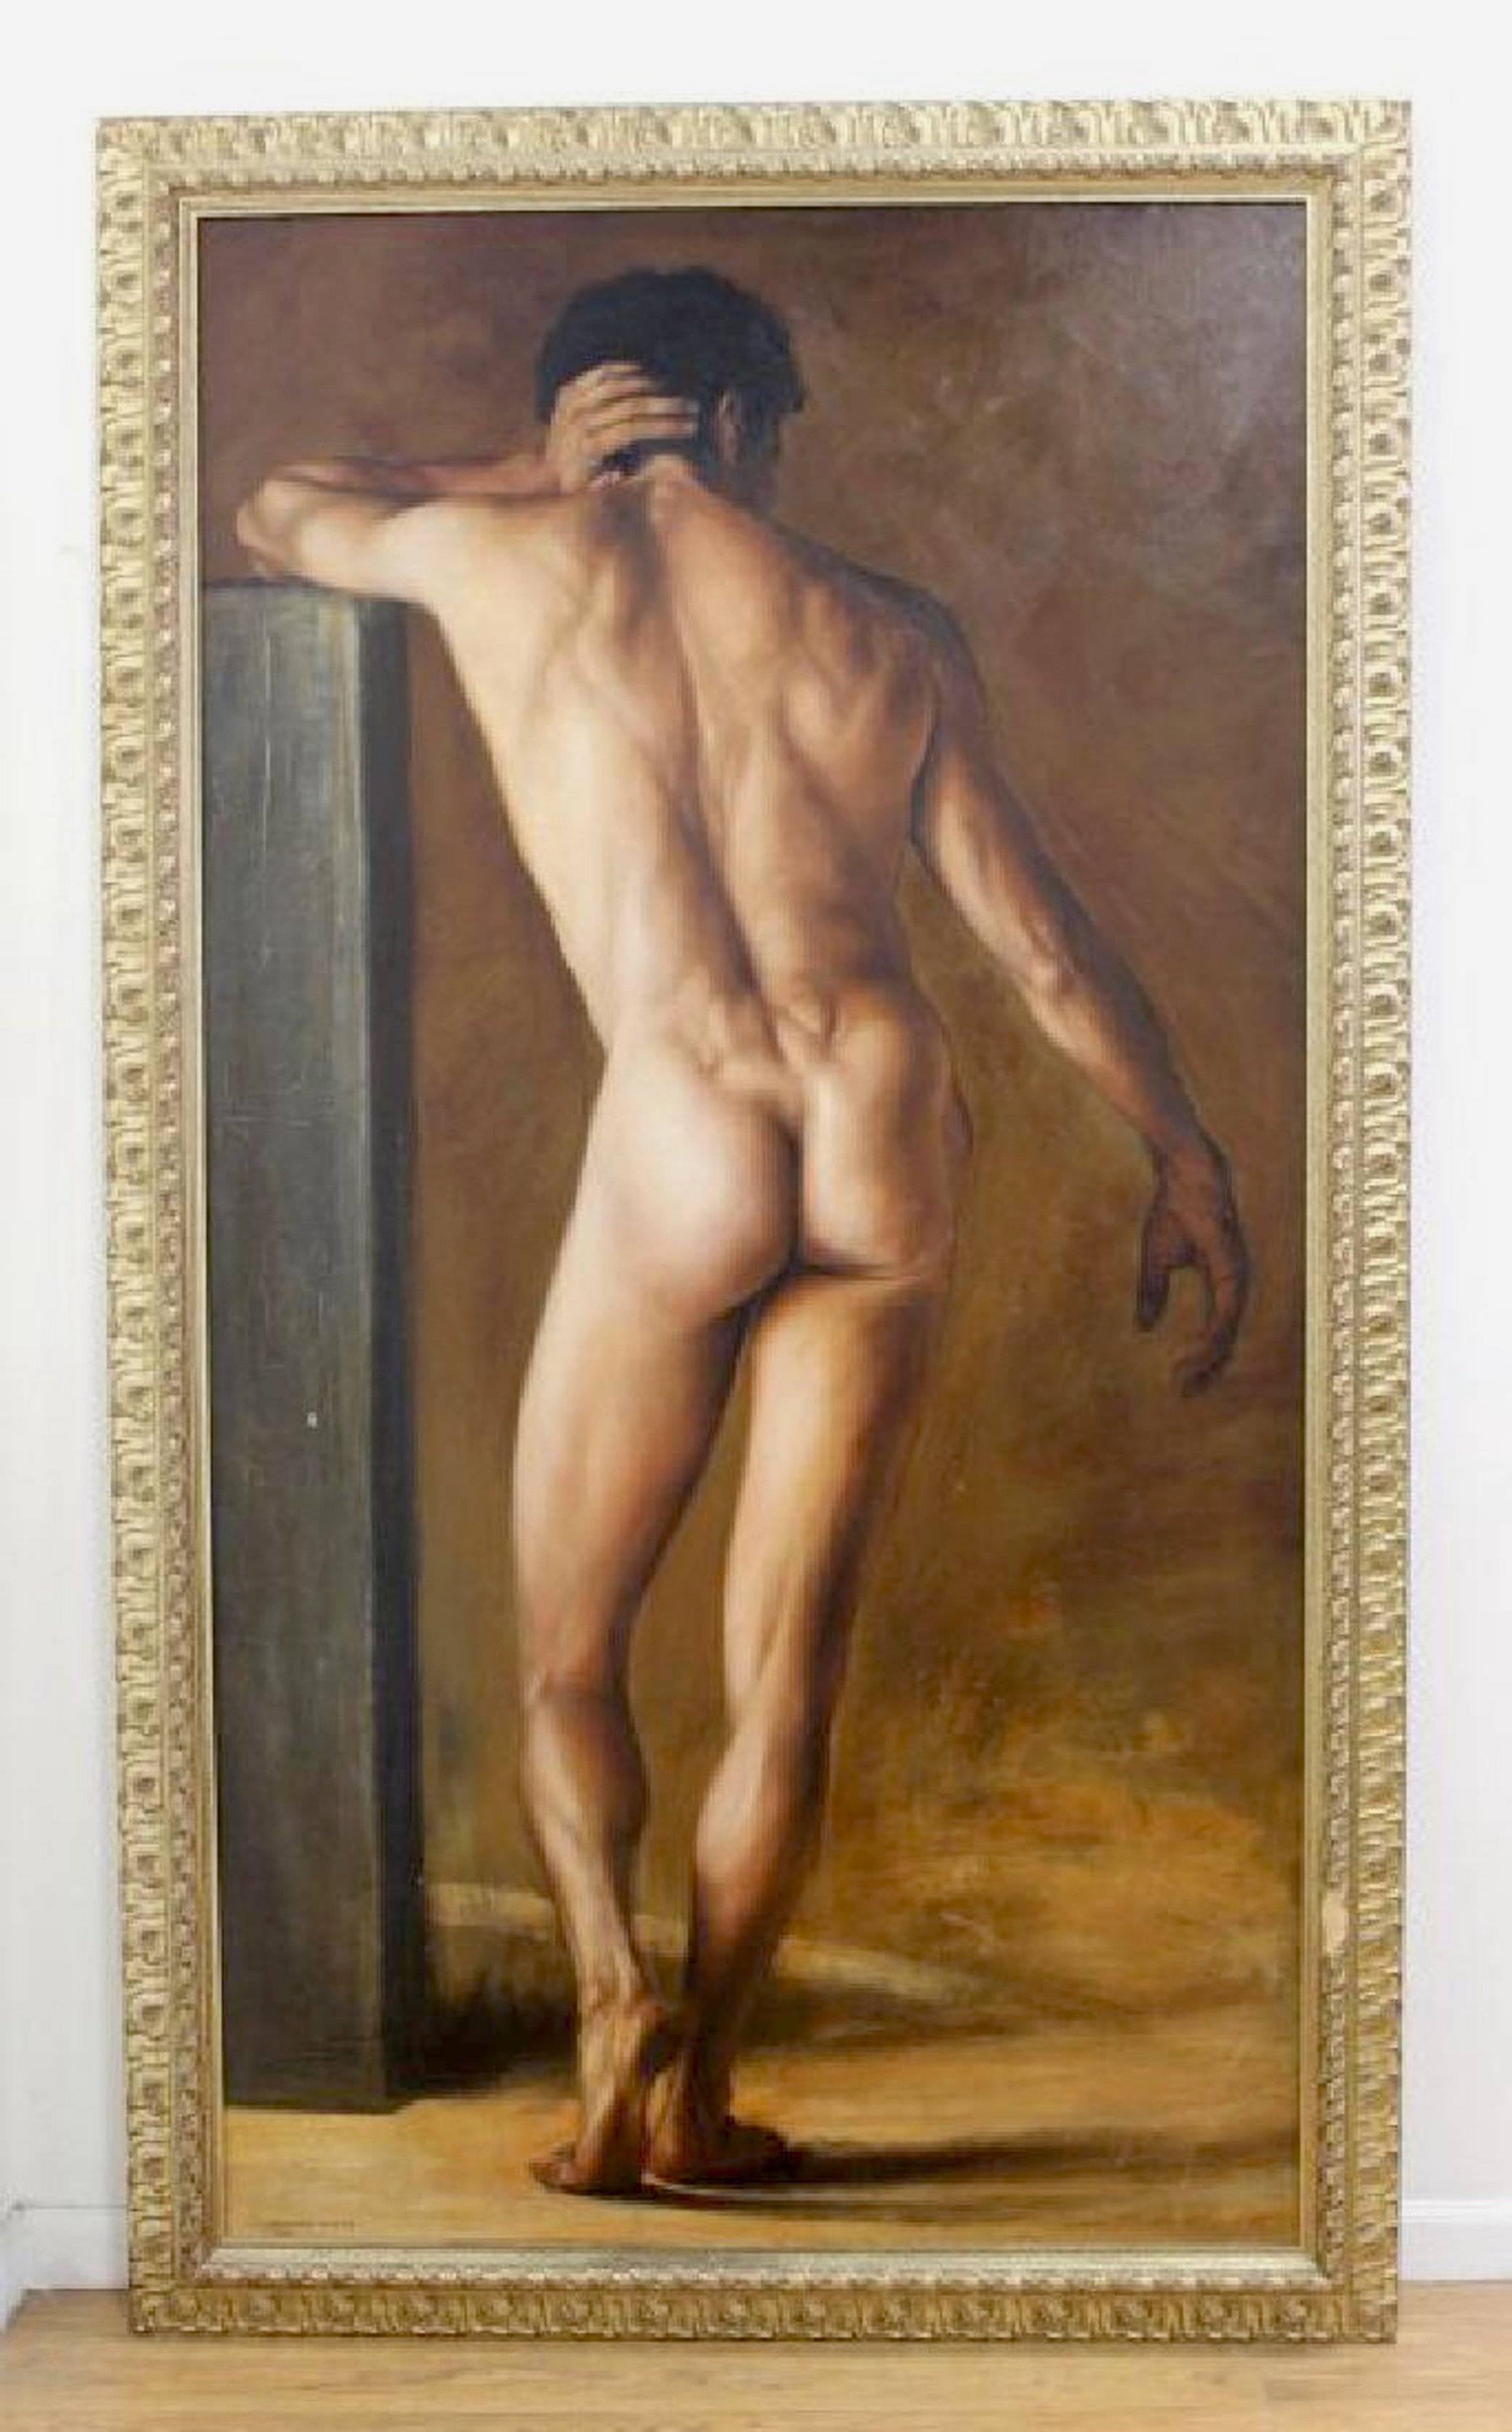 Large academic style male nude by Gunnar Ahmer, 2002
Signed lower left Gunnar Ahmer 2002
Gunnar Ahmer was born and raised in Bergen, Norway. He has lived, studied, and worked in Europe, Far East, and Mexico, He now resides in Los Angeles,